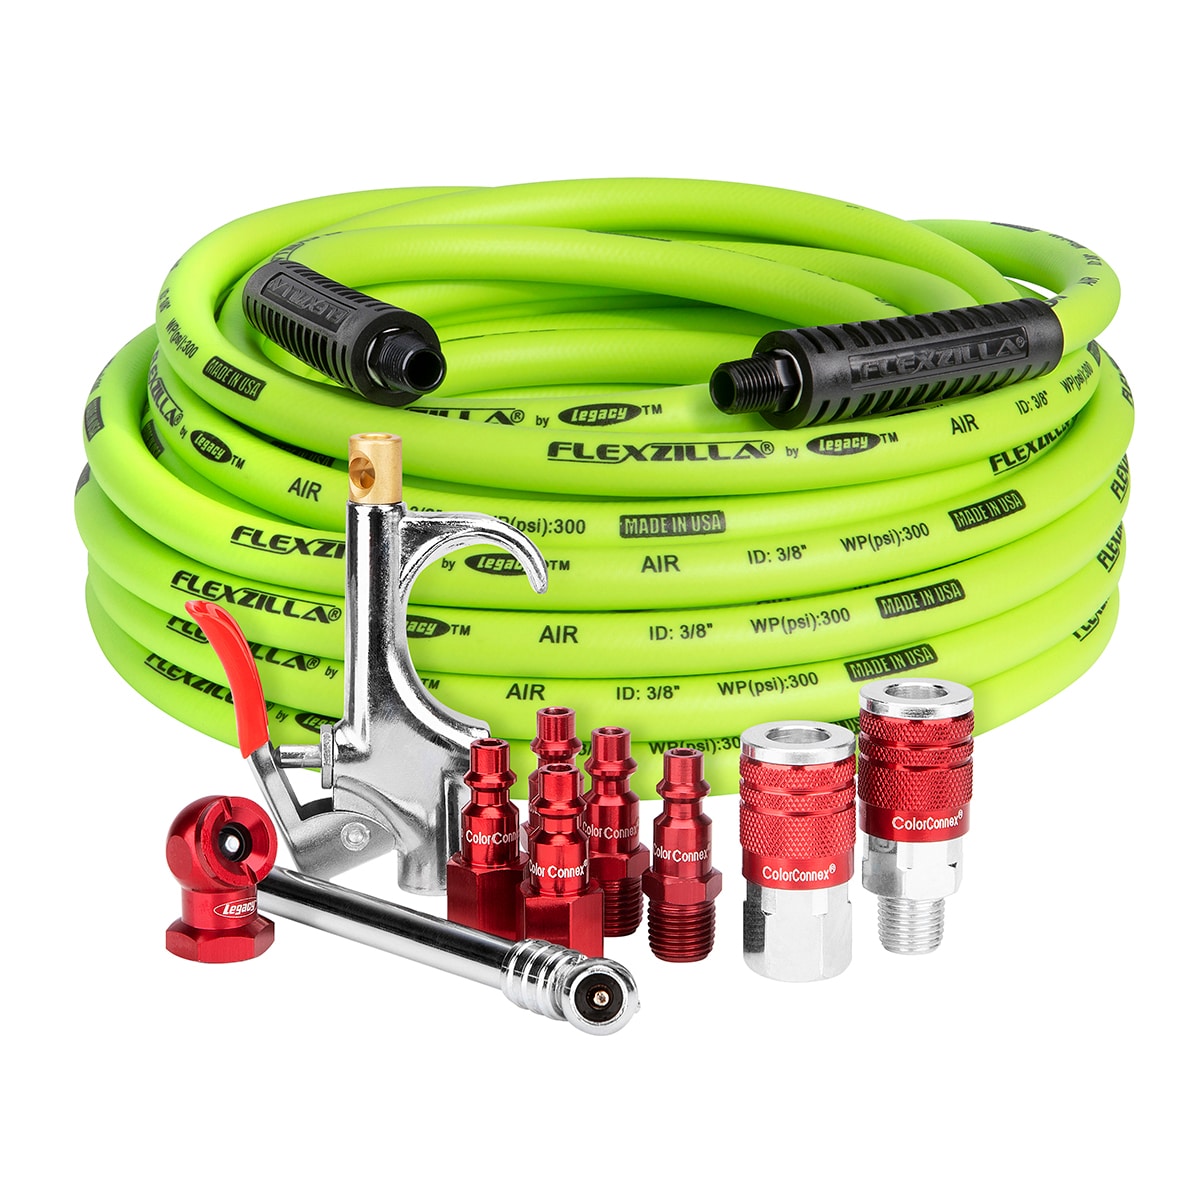 Flexzilla Air Hose, 1/4-in x 50-ft, 1/4-in Mnpt Fittings in the